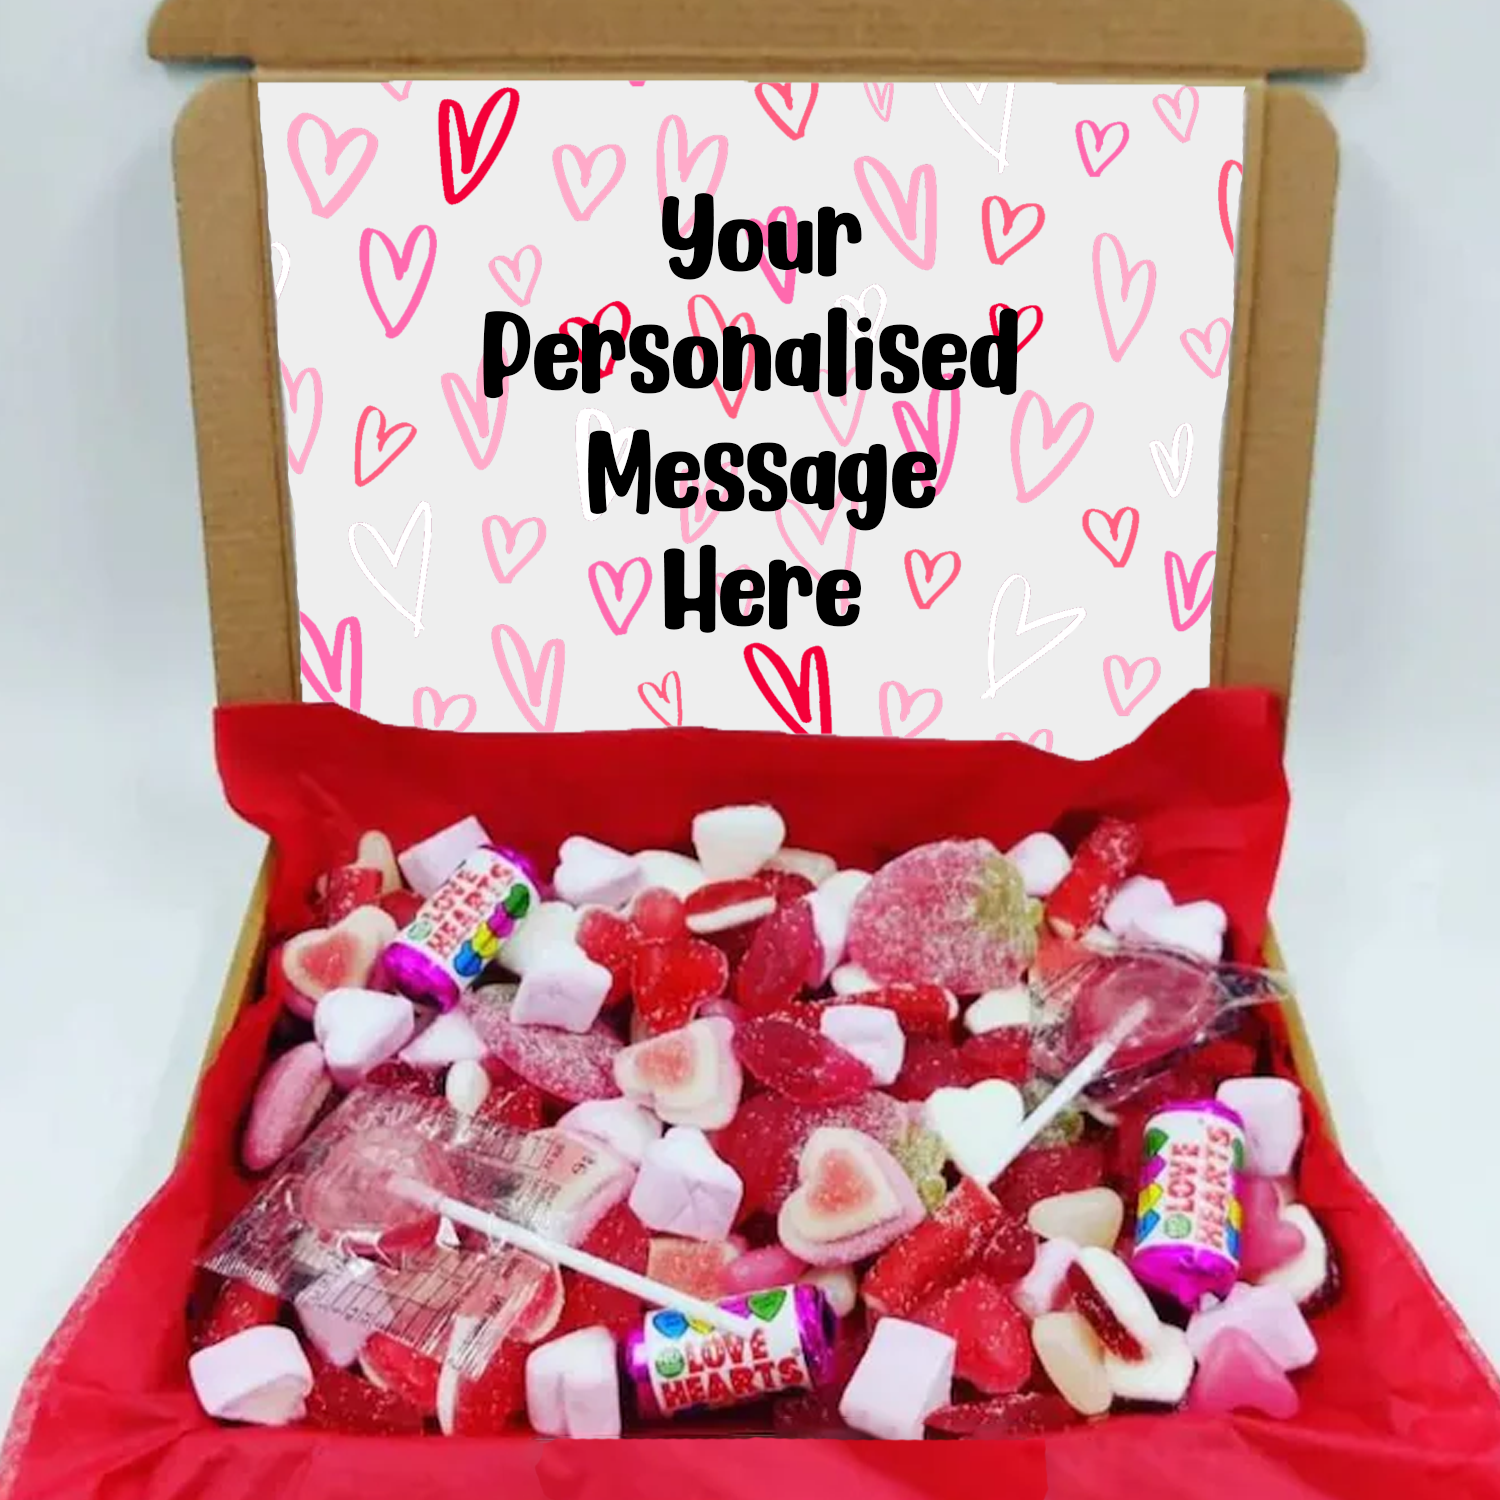 Personalised Happy Valentine's Day Sweet Box Gift – A.C designs ltd